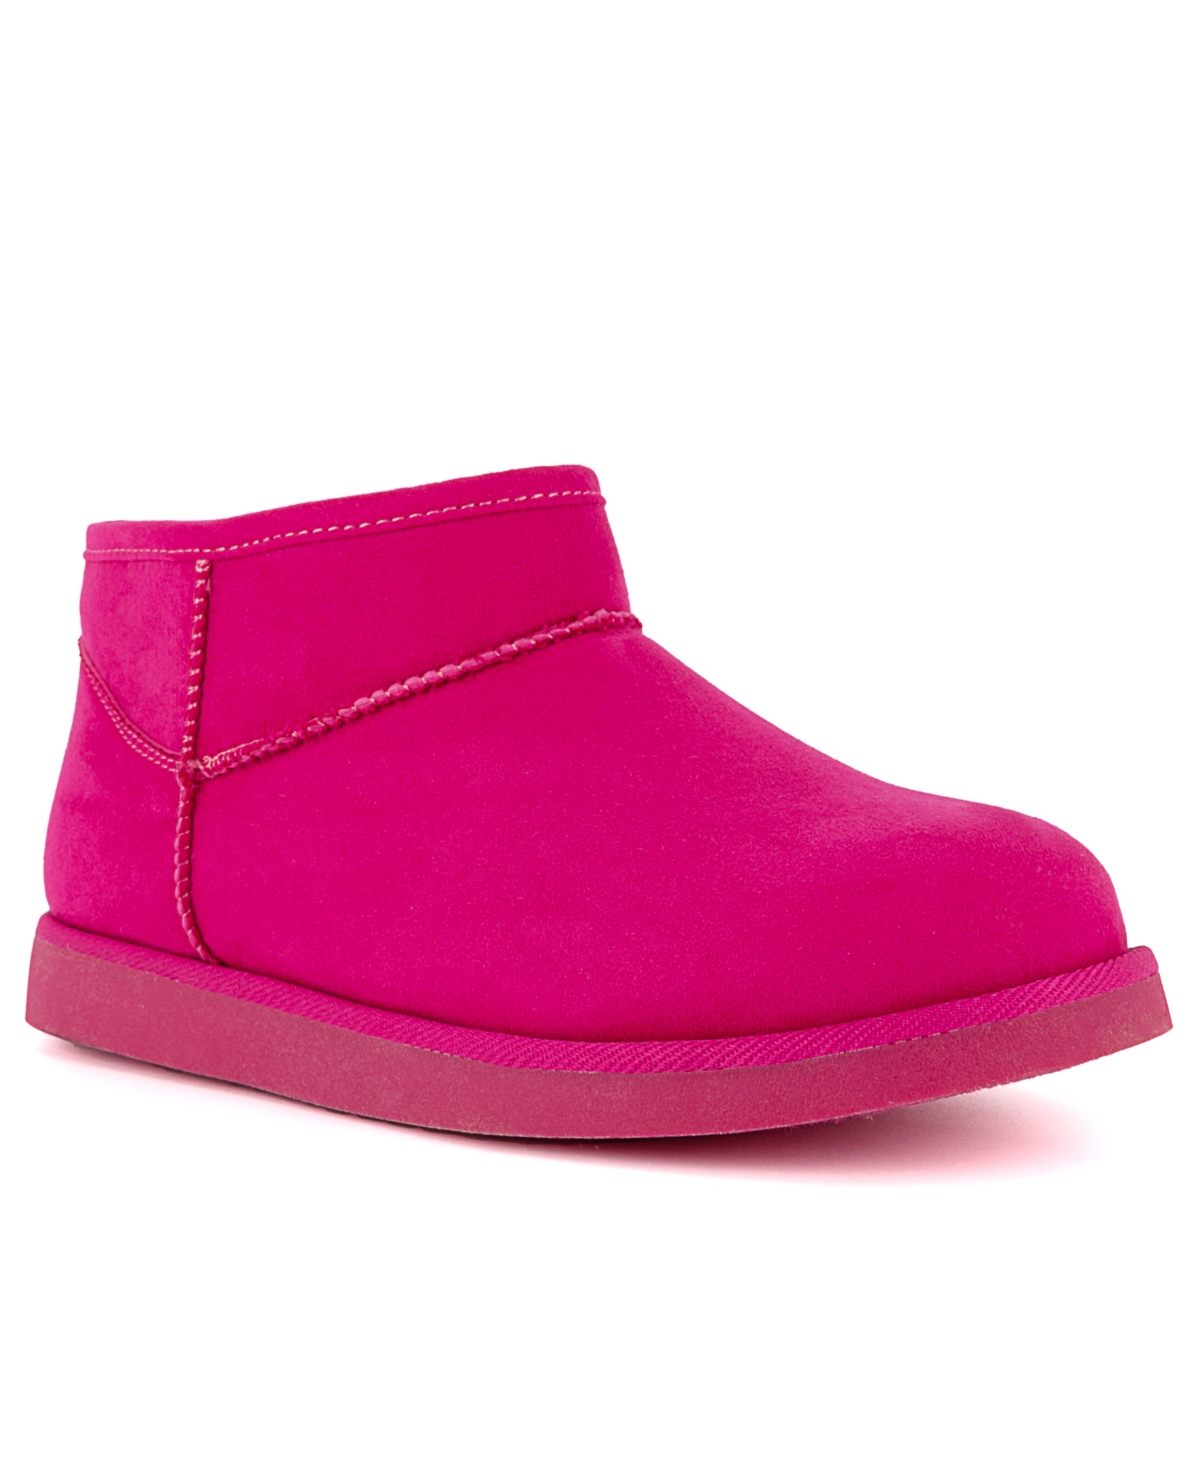 Juicy Couture Women's Kiona Cold Weather Boots In Fuchsia